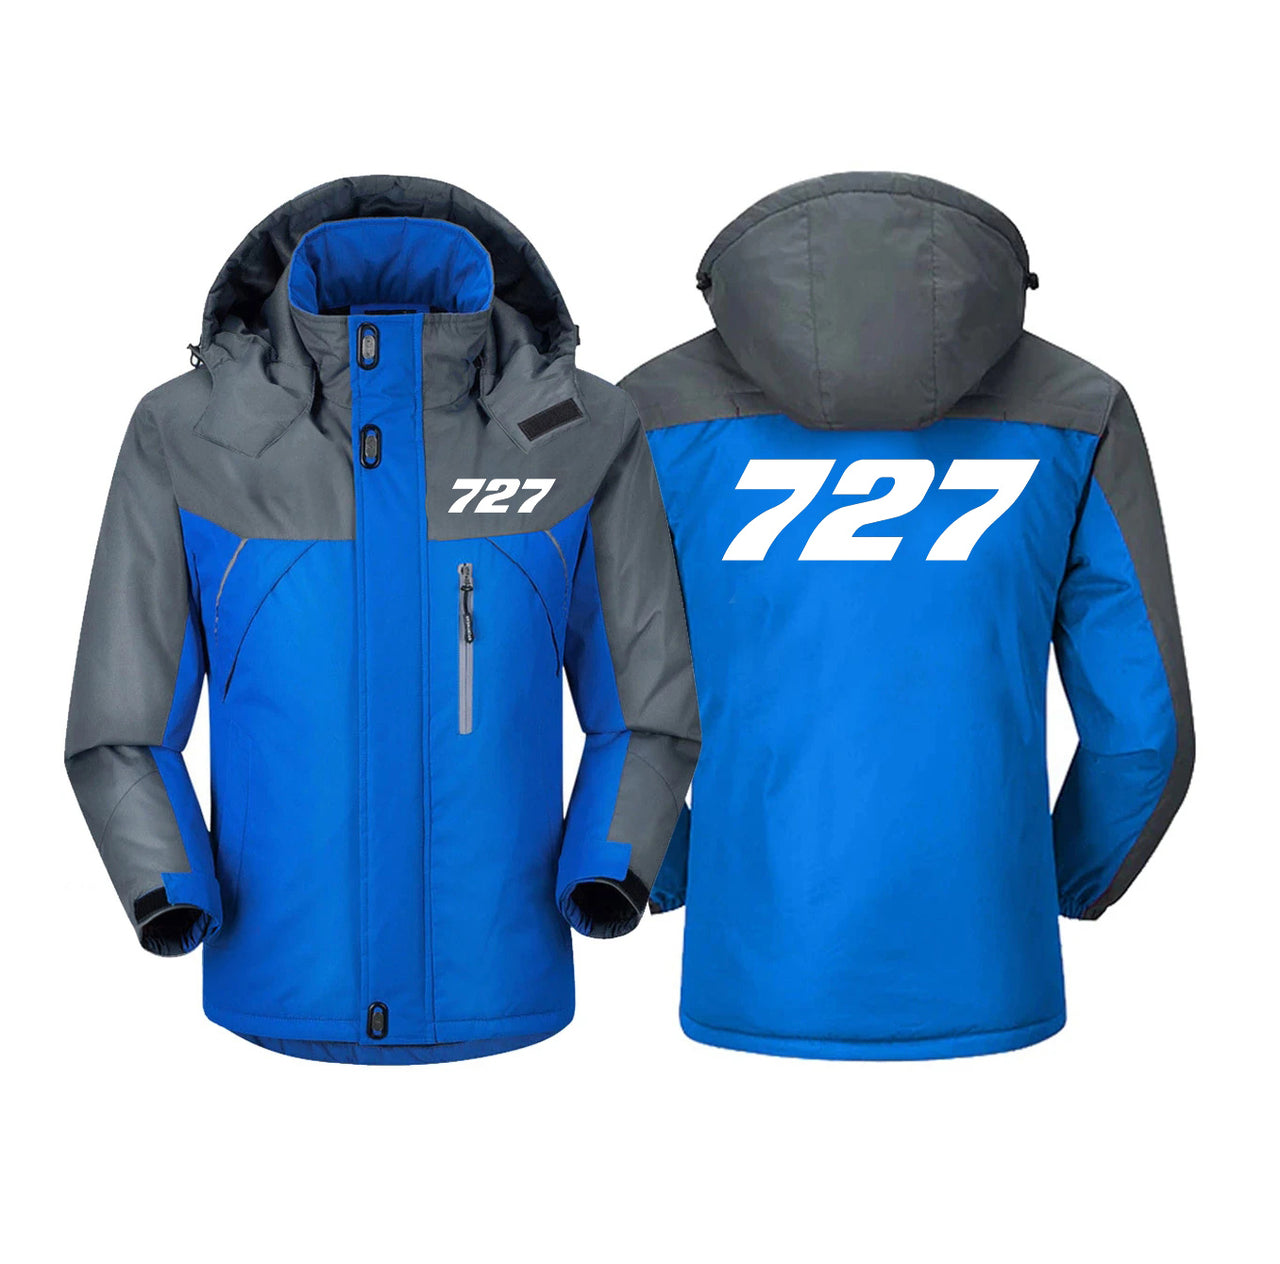 727 Flat Text Designed Thick Winter Jackets